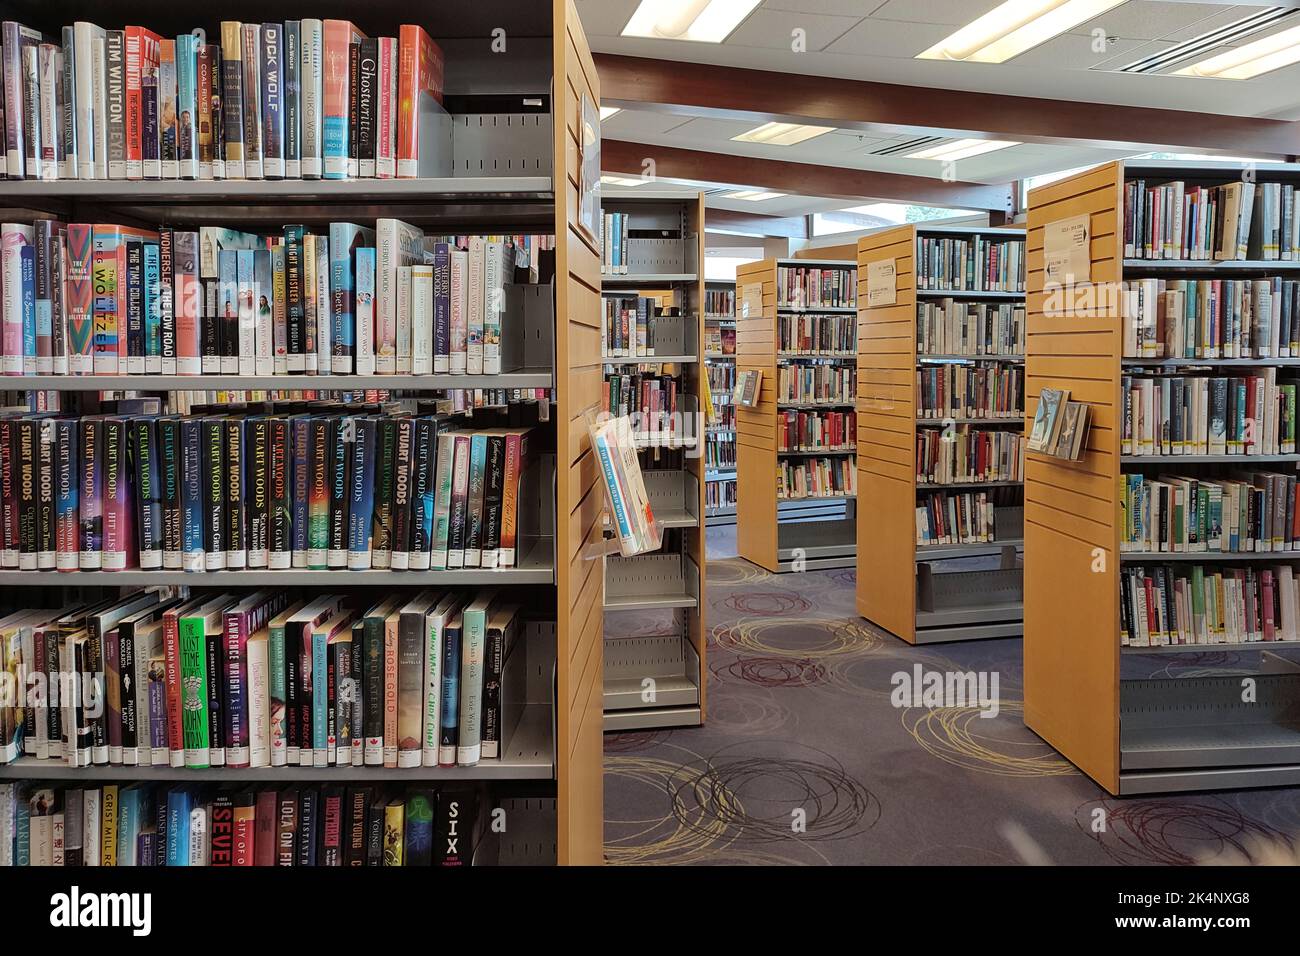 Library. Bookshelves with books and textbooks. Learning and education concept. Stock Photo